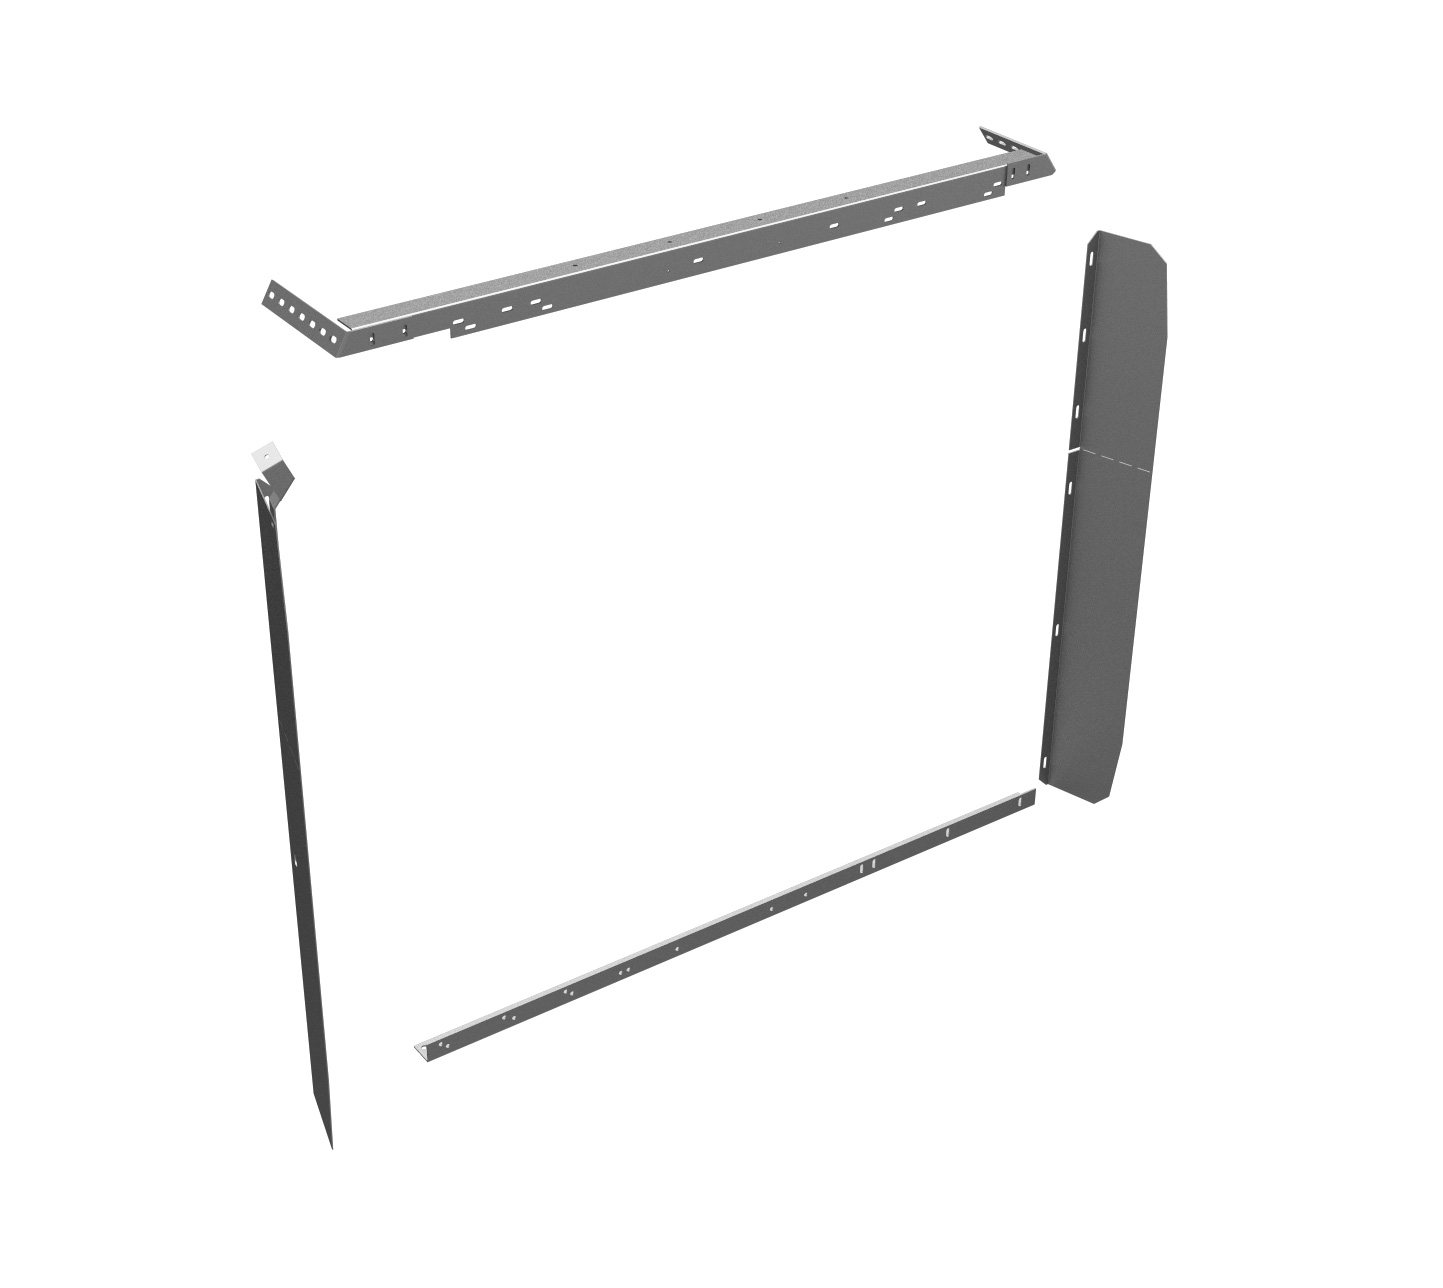 Steel Partition Mounting Kit